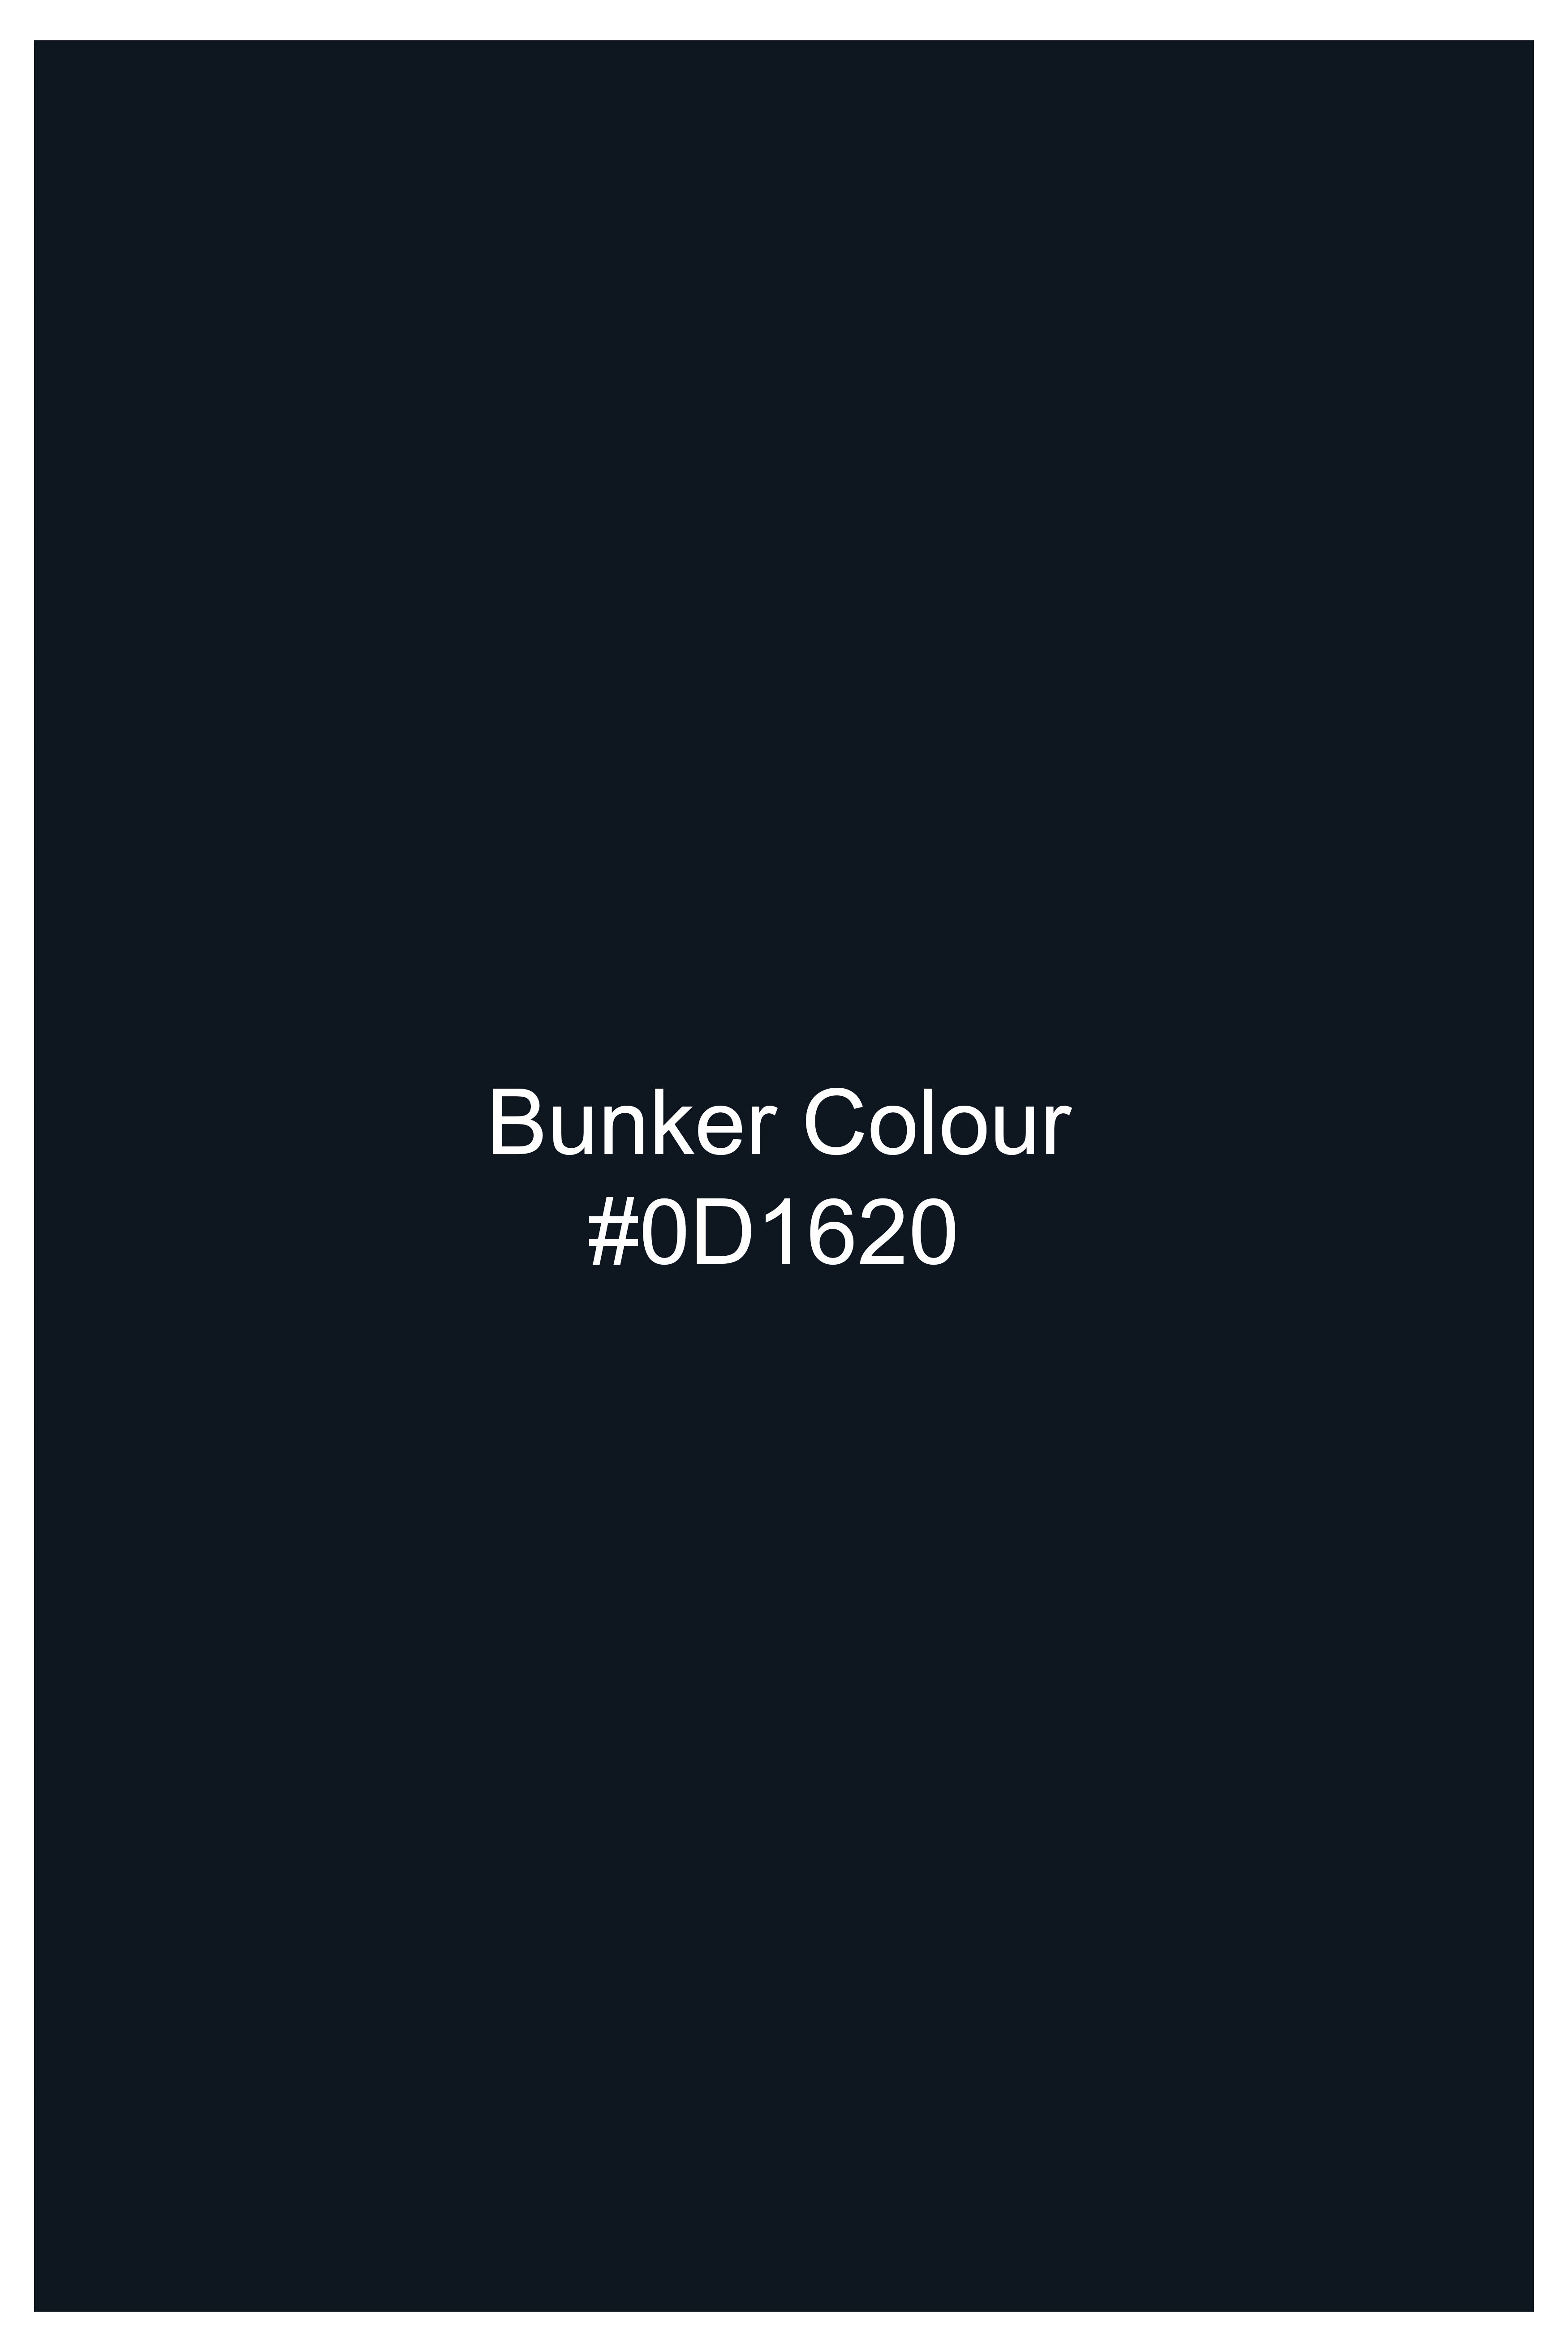 Bunker Blue Premium Cotton Double Breasted Blazer BL3115-DB-36, BL3115-DB-38, BL3115-DB-40, BL3115-DB-42, BL3115-DB-44, BL3115-DB-46, BL3115-DB-48, BL3115-DB-50, BL3115-DB-52, BL3115-DB-54, BL3115-DB-56, BL3115-DB-58, BL3115-DB-60